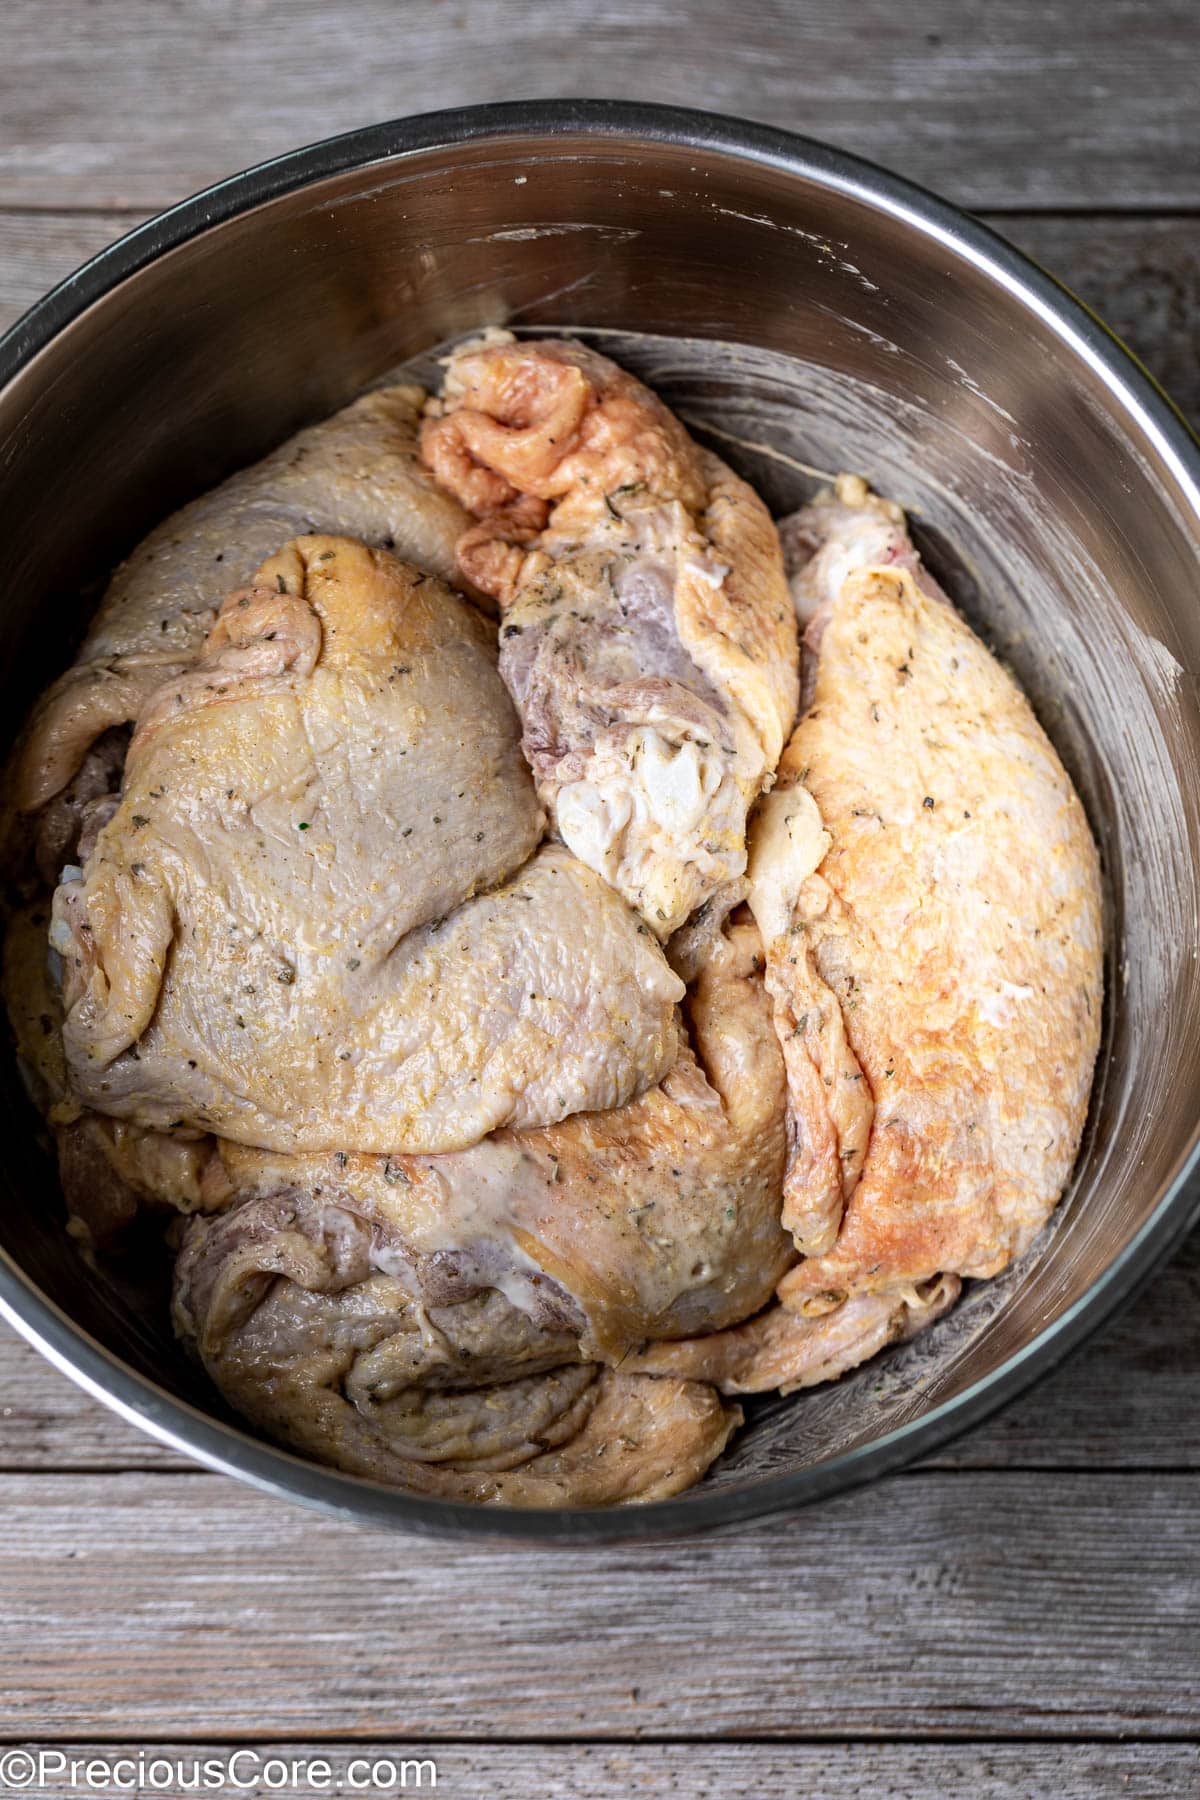 Seasoned chicken thighs in a stainless steel mixing bowl.